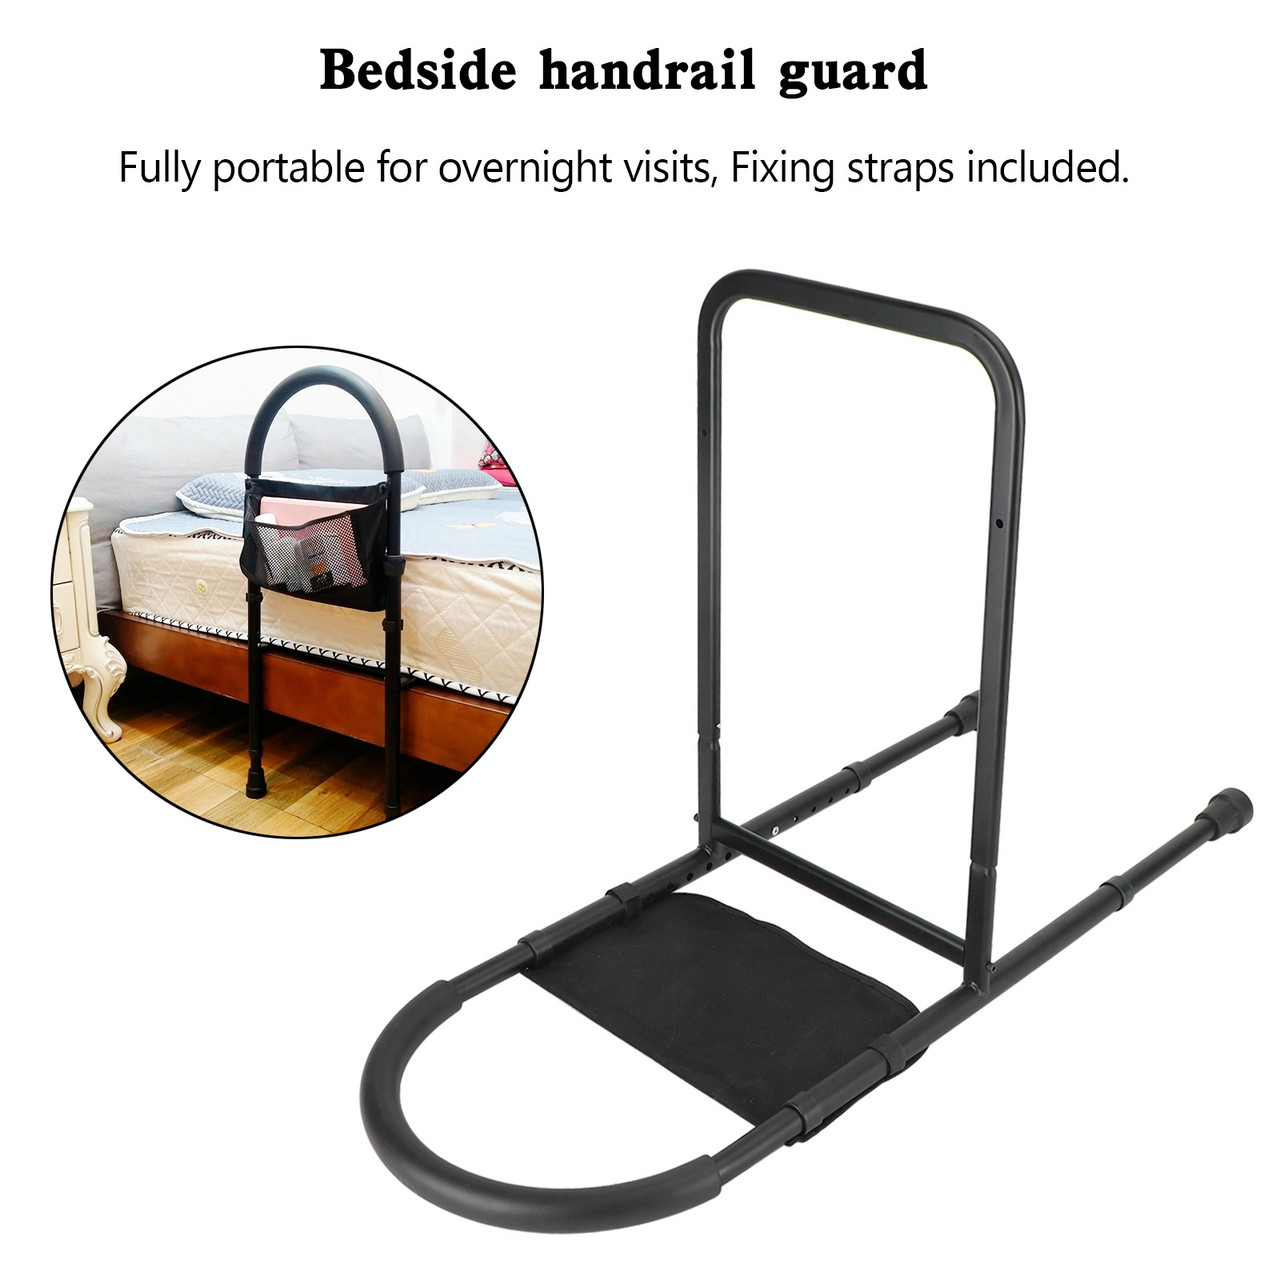 Bed Rail Mobility Aid Guard Adjustable Assist Rail Grab Bar For Senior/Disabled